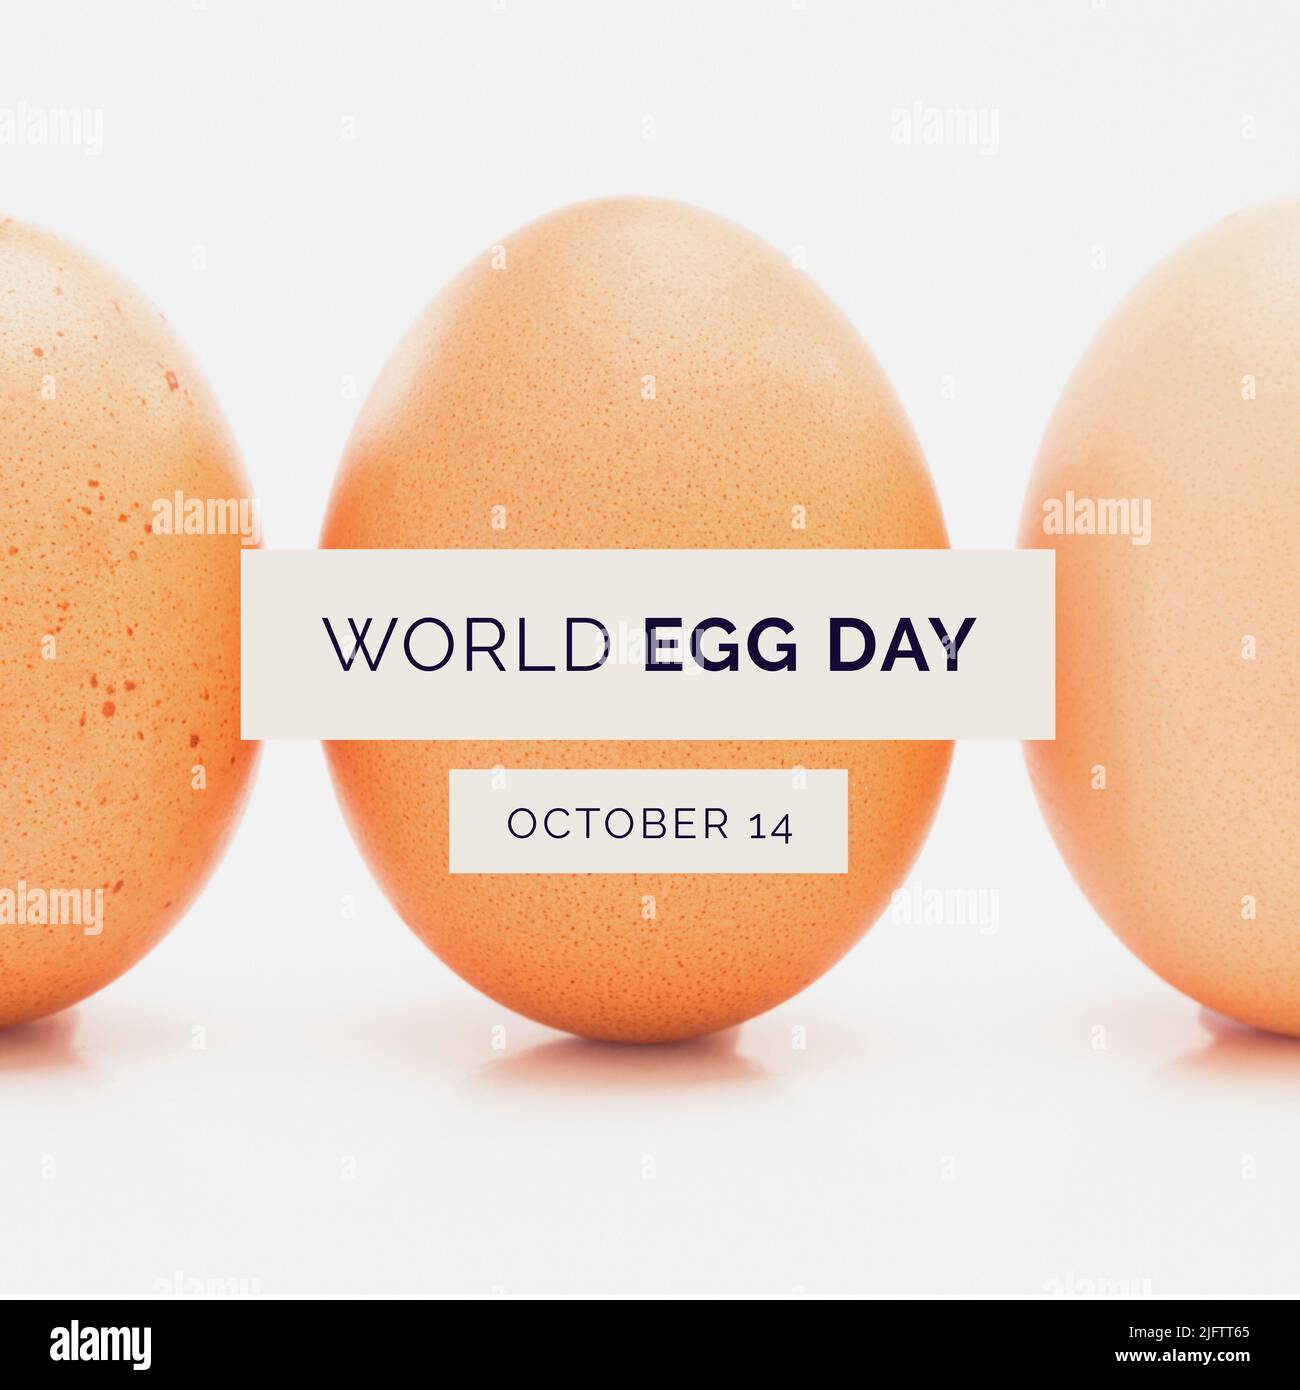 Composite of brown eggs arranged with world egg day and october 14 text against white background Stock Photo